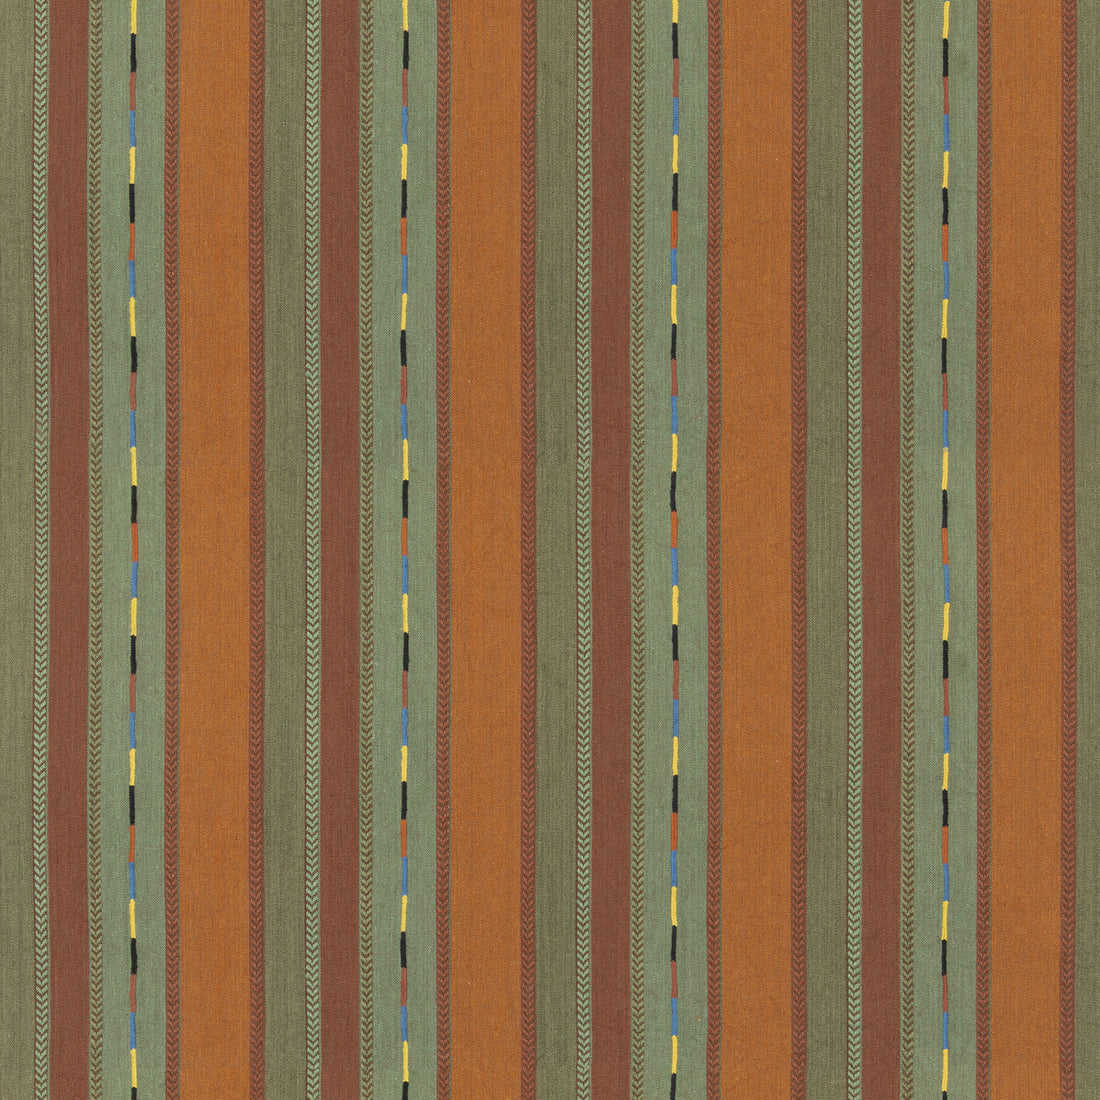 Bunty fabric in orange/green color - pattern BF11062.3.0 - by G P &amp; J Baker in the X Kit Kemp Stripes collection